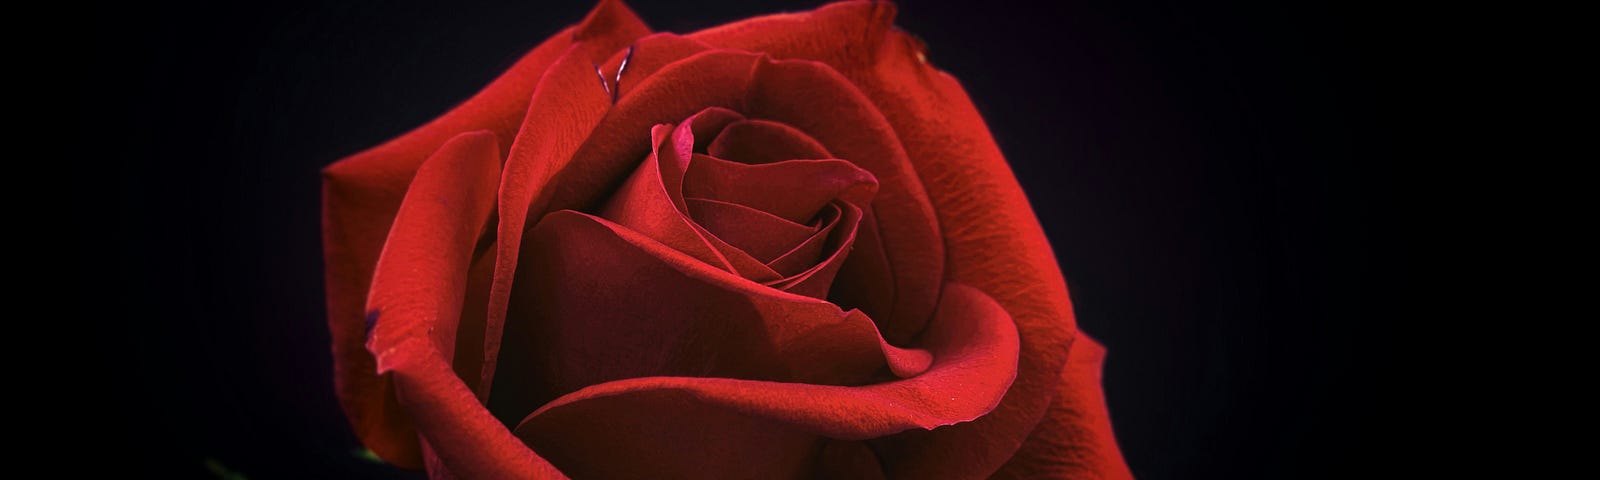 A single red rose with a black background.